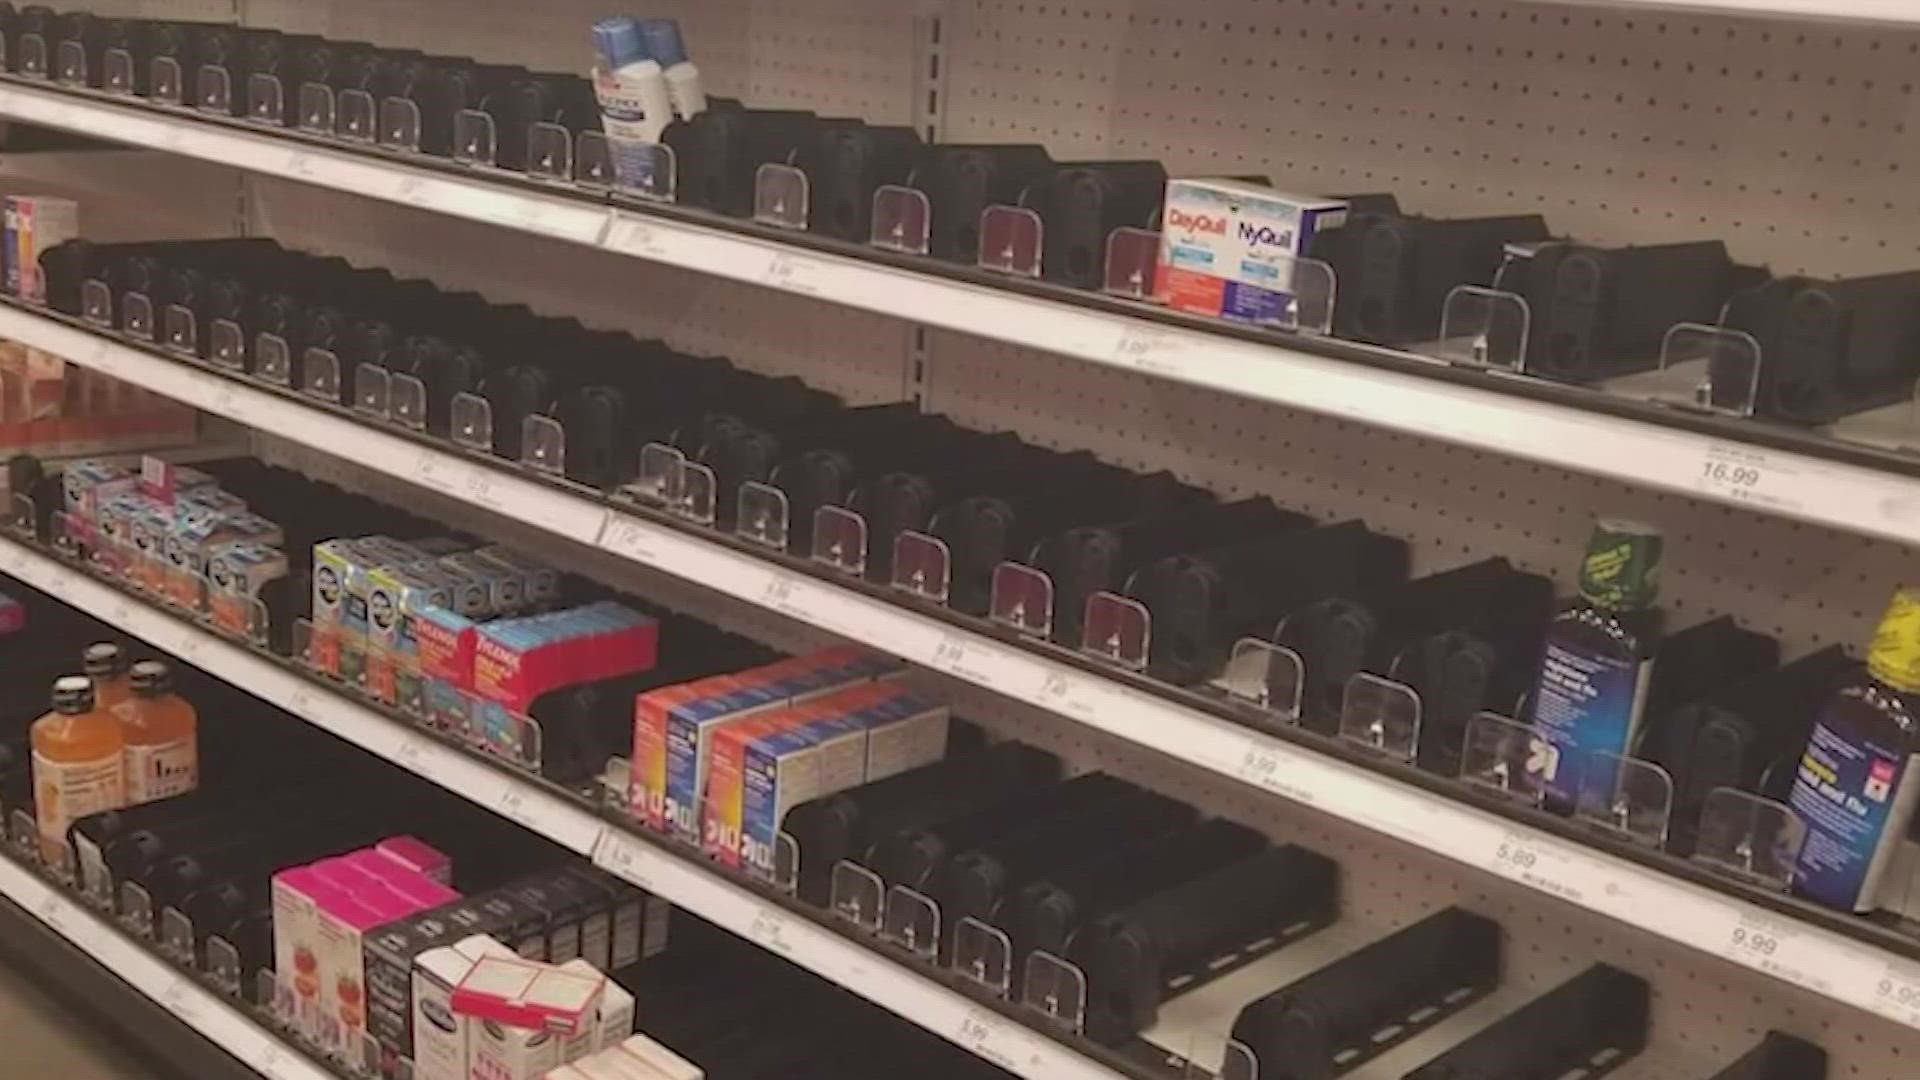 More and more people in the Houston area are noticing empty pharmacy shelves.